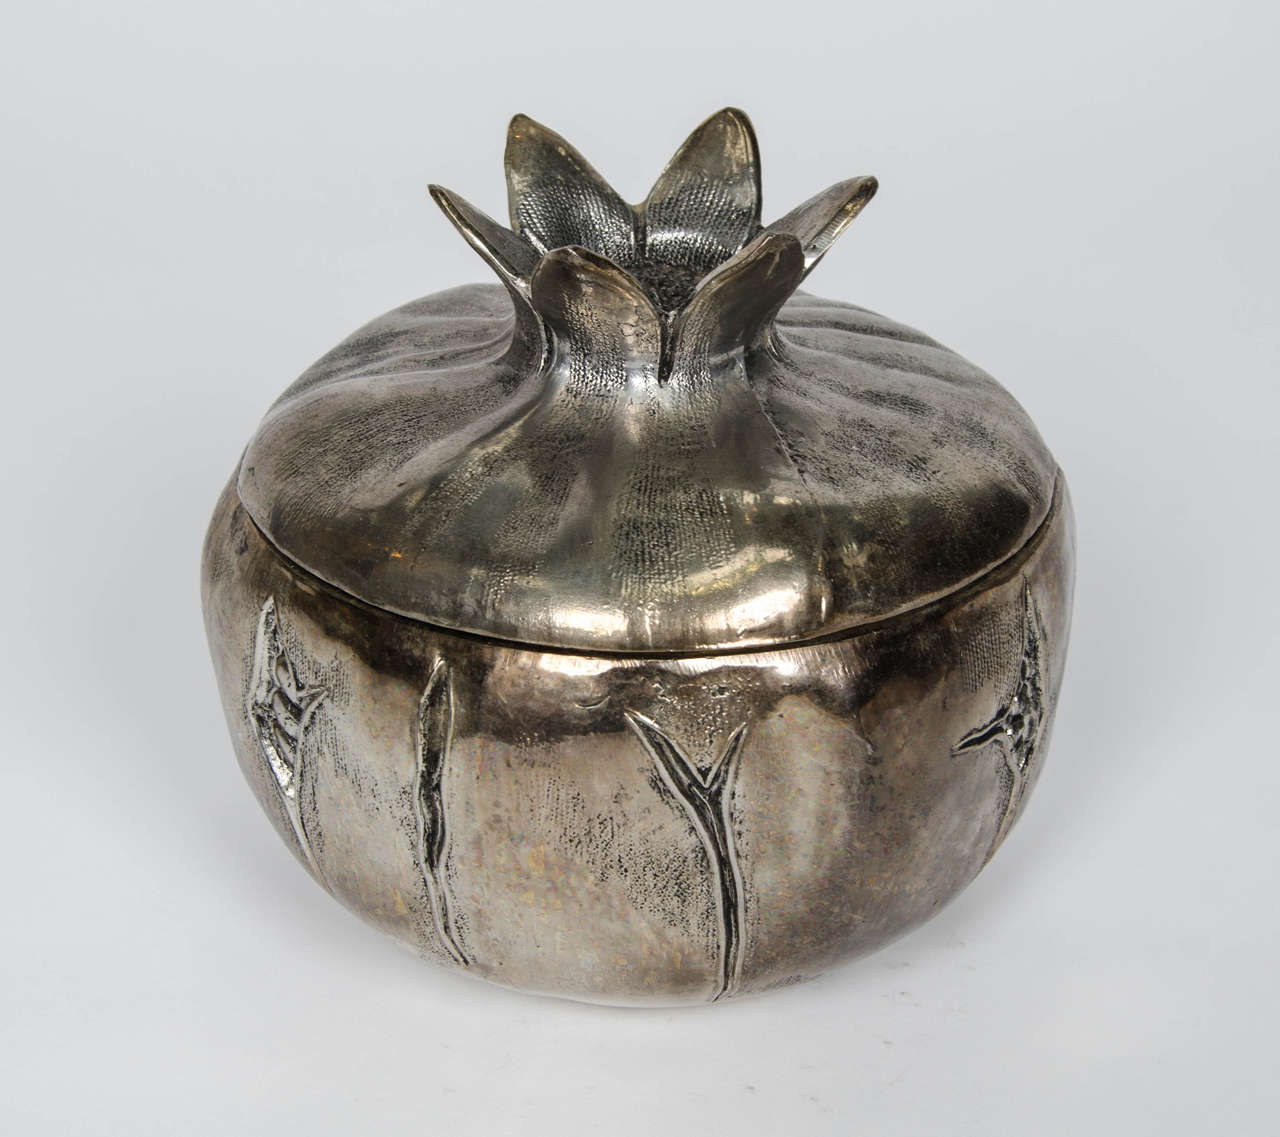 Ice bucket signed: M. M., fond. d'arte Firenze, Made in Italy, Mod. Ris. silver plated, well cast.